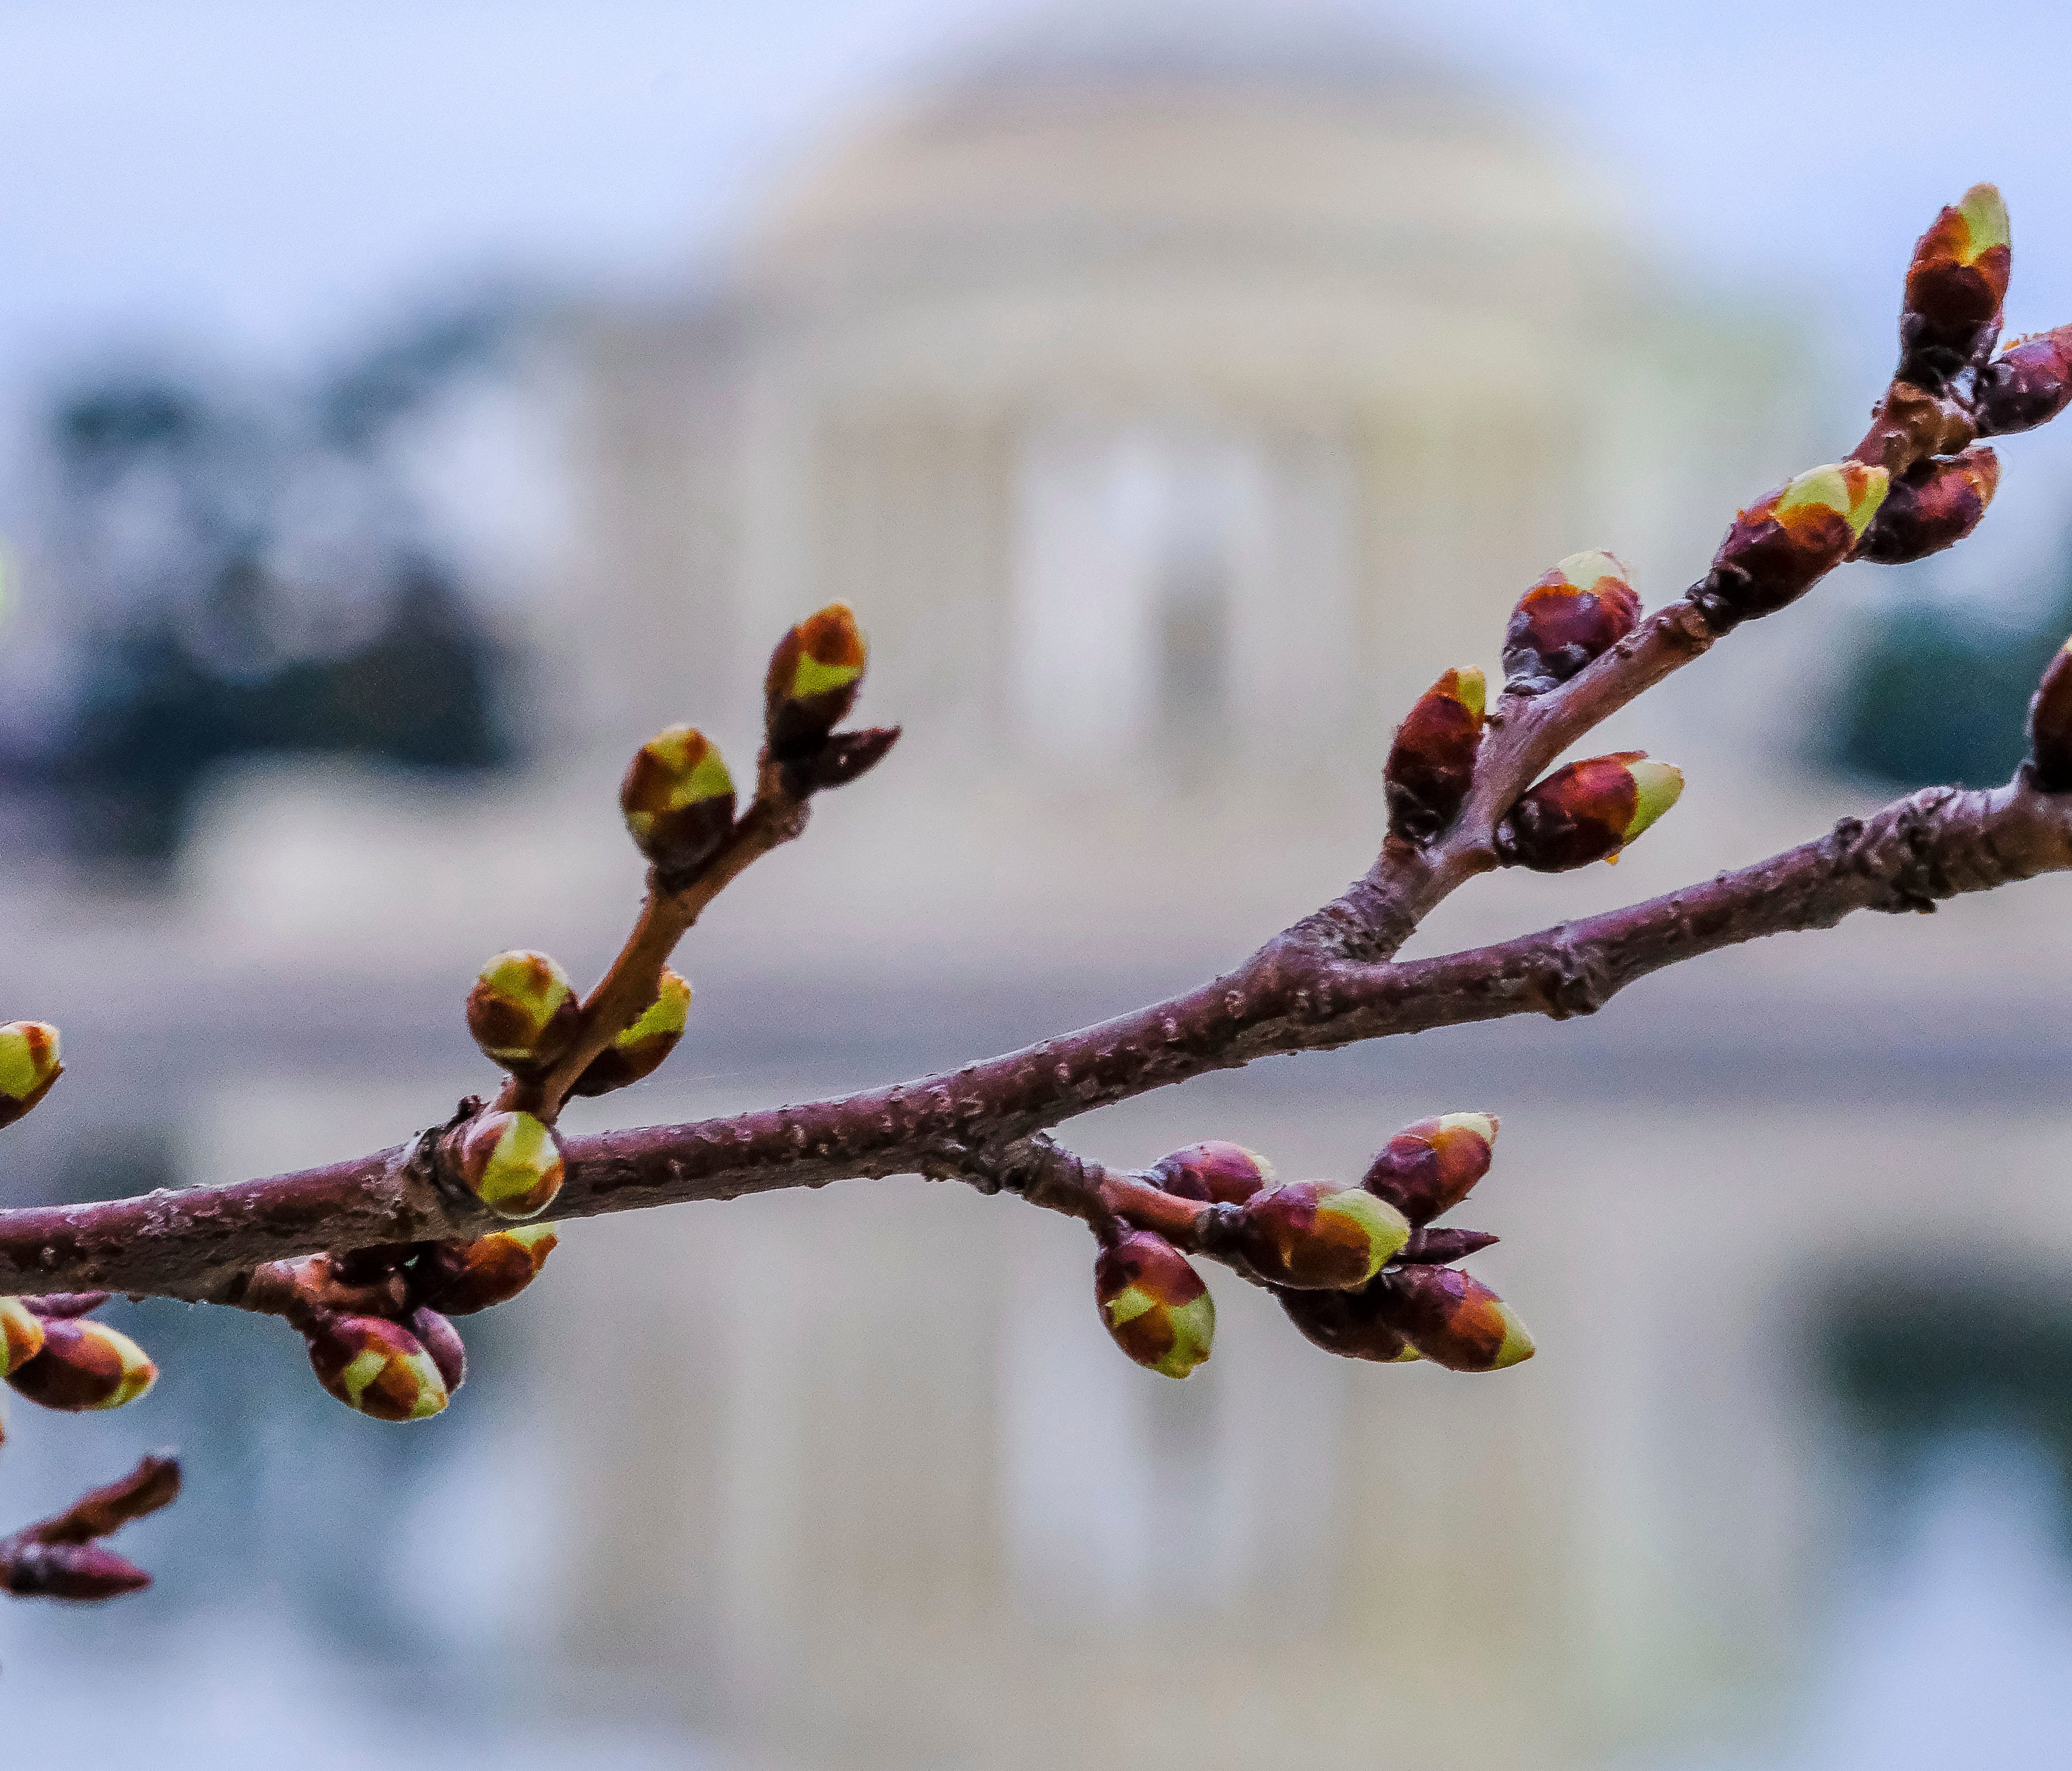 The cherry trees surrounding the Tidal Basin in Washington, D.C. have started to bud.